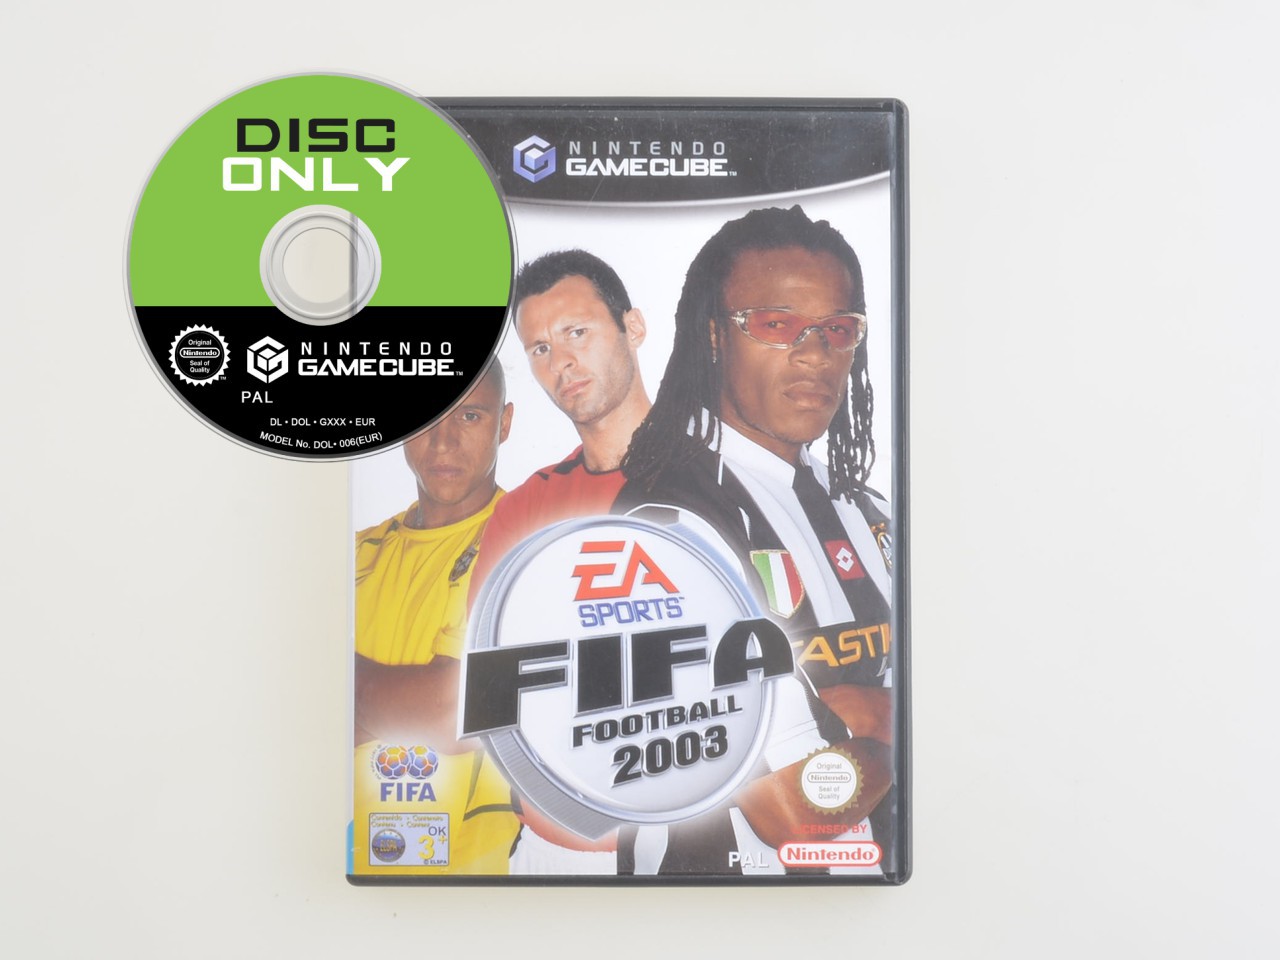 FIFA Football 2003 - Disc Only - Gamecube Games